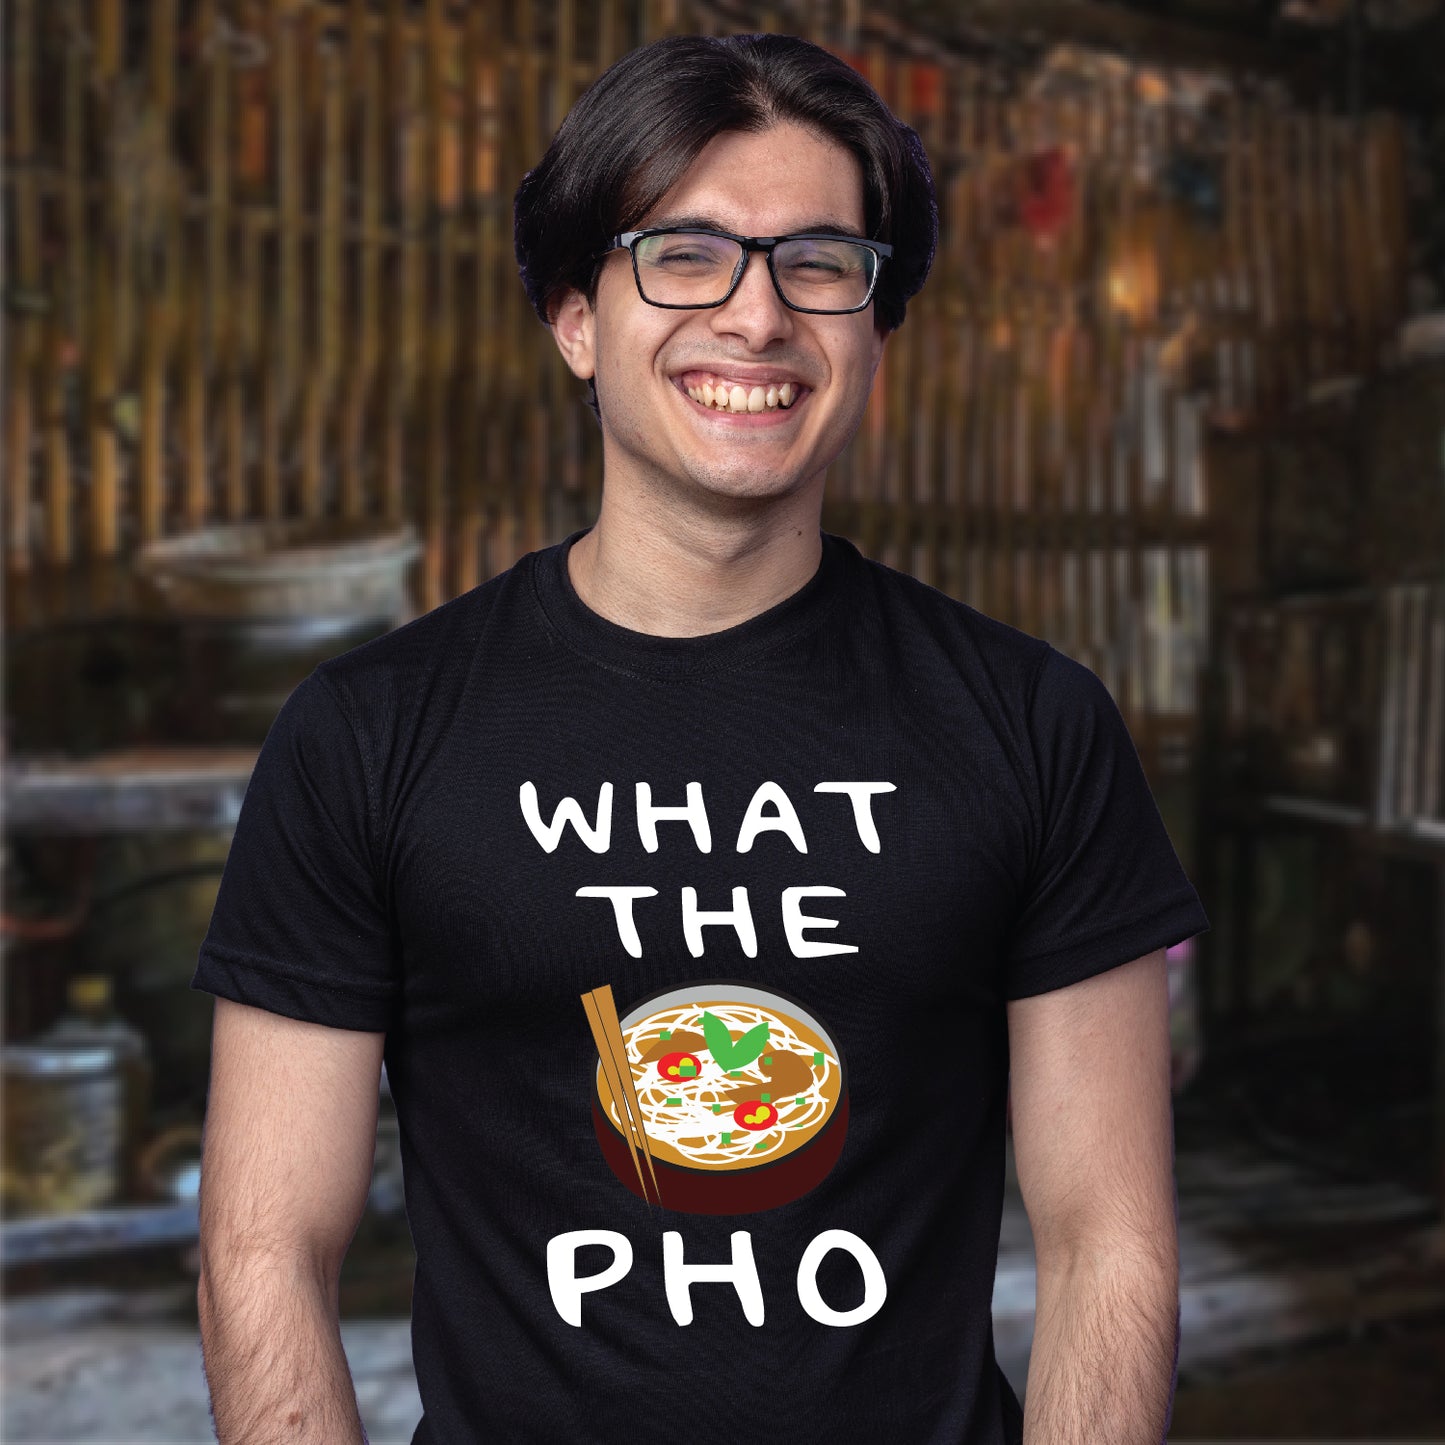 What the Pho T-shirt